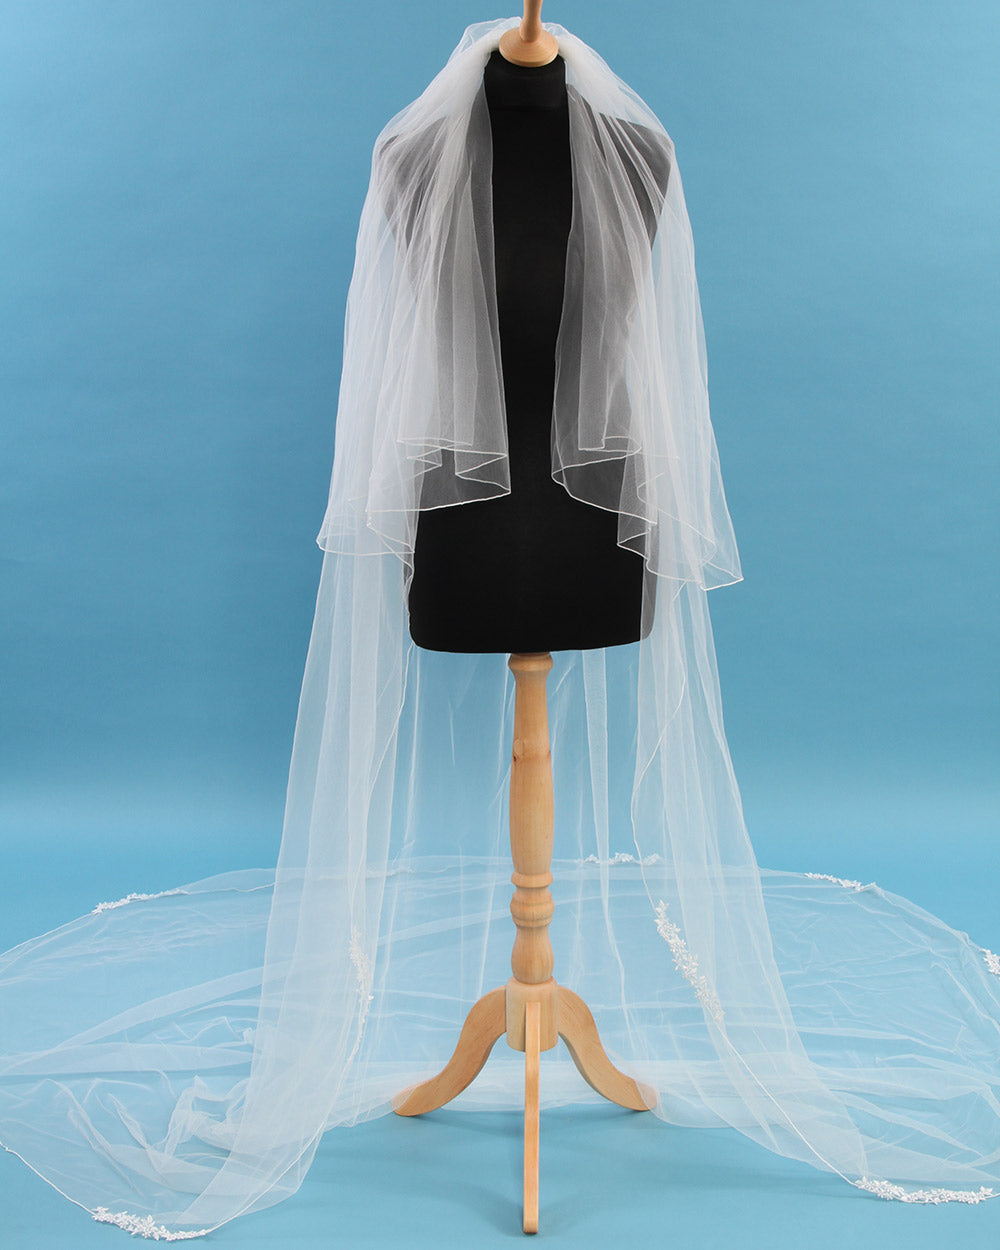 Lend a fabulous floral touch to your bridal look with this beautiful wedding veil. This delicate ivory tulle wedding veil is embellished with a floral lace motif edge.